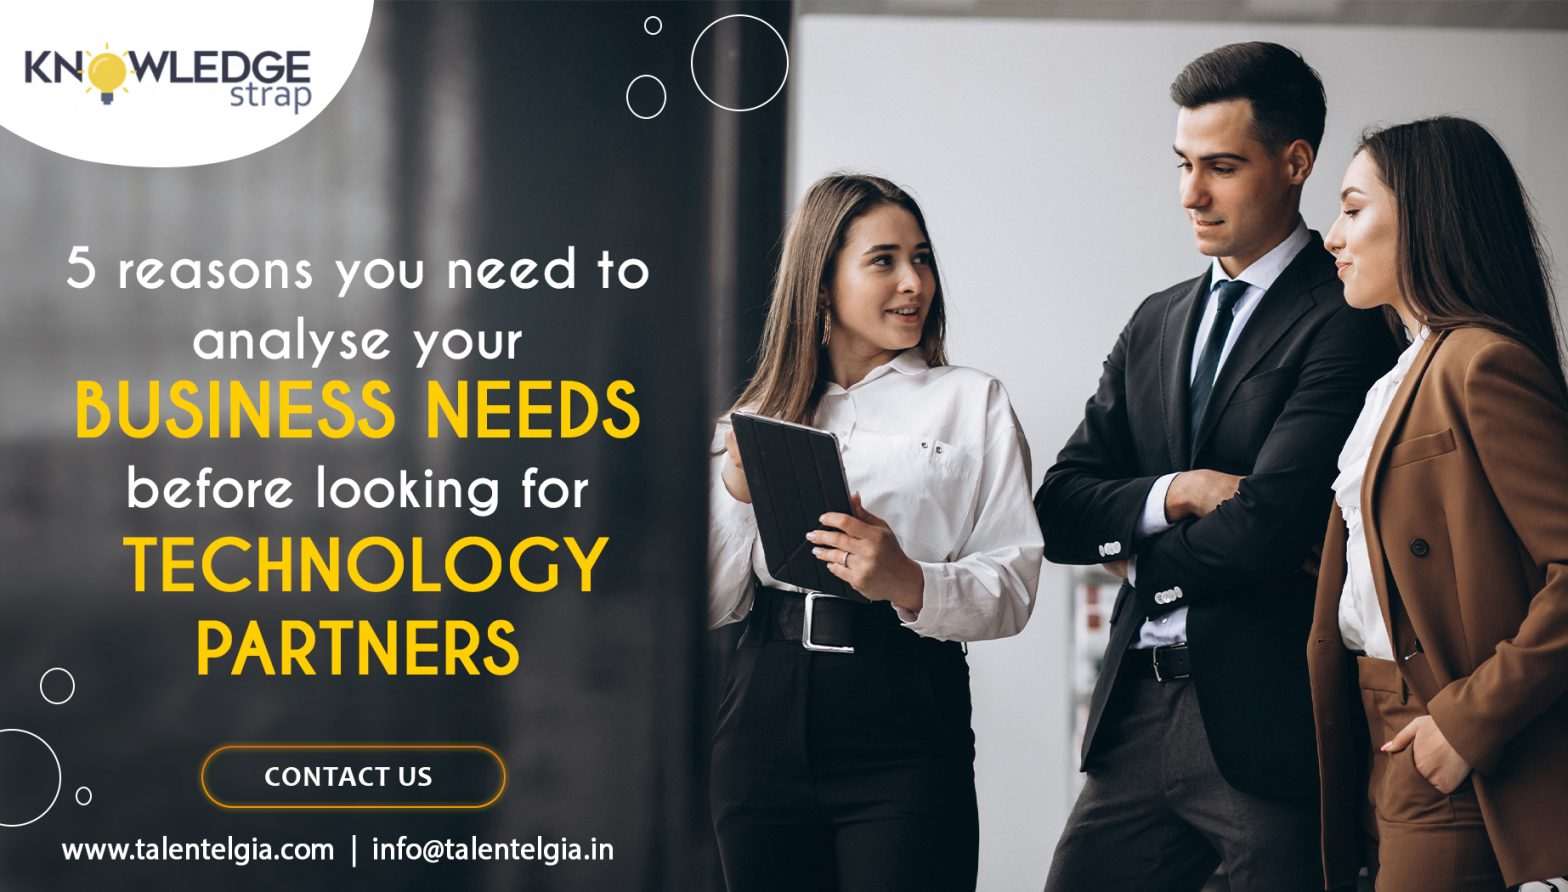 5 Reasons You Need to Analyse your Business Needs Before Looking for Technology Partners